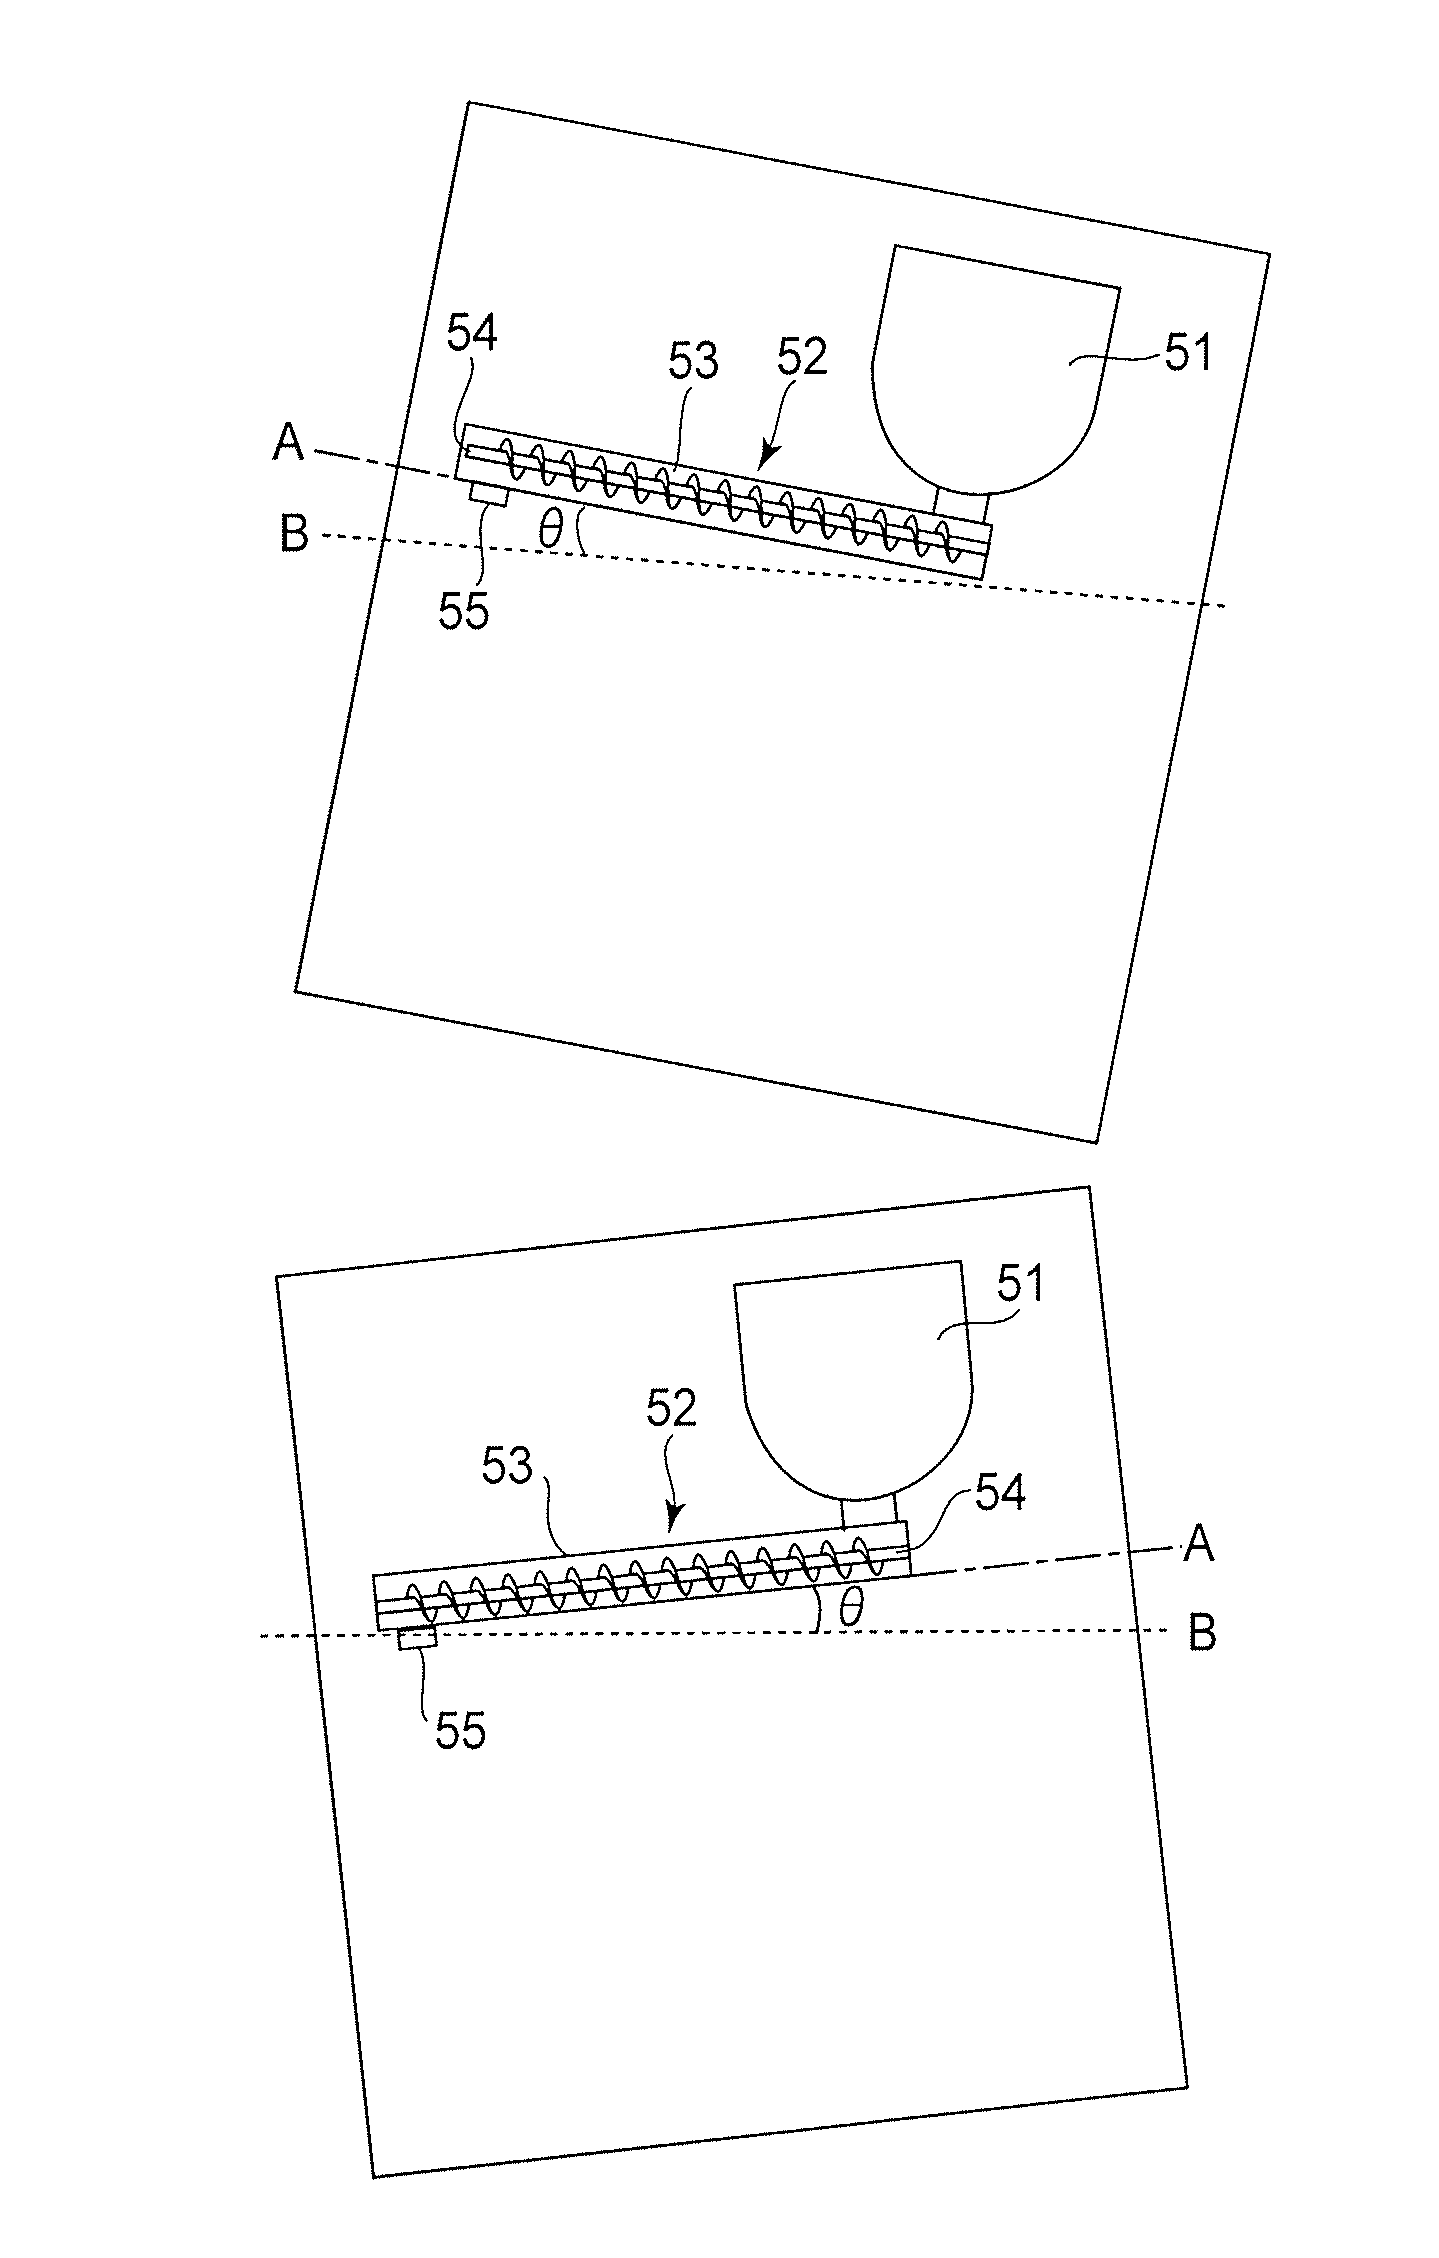 Image forming apparatus featuring a controller for controlling rotation of a developer feeding screw in response to an angle of inclination of the apparatus